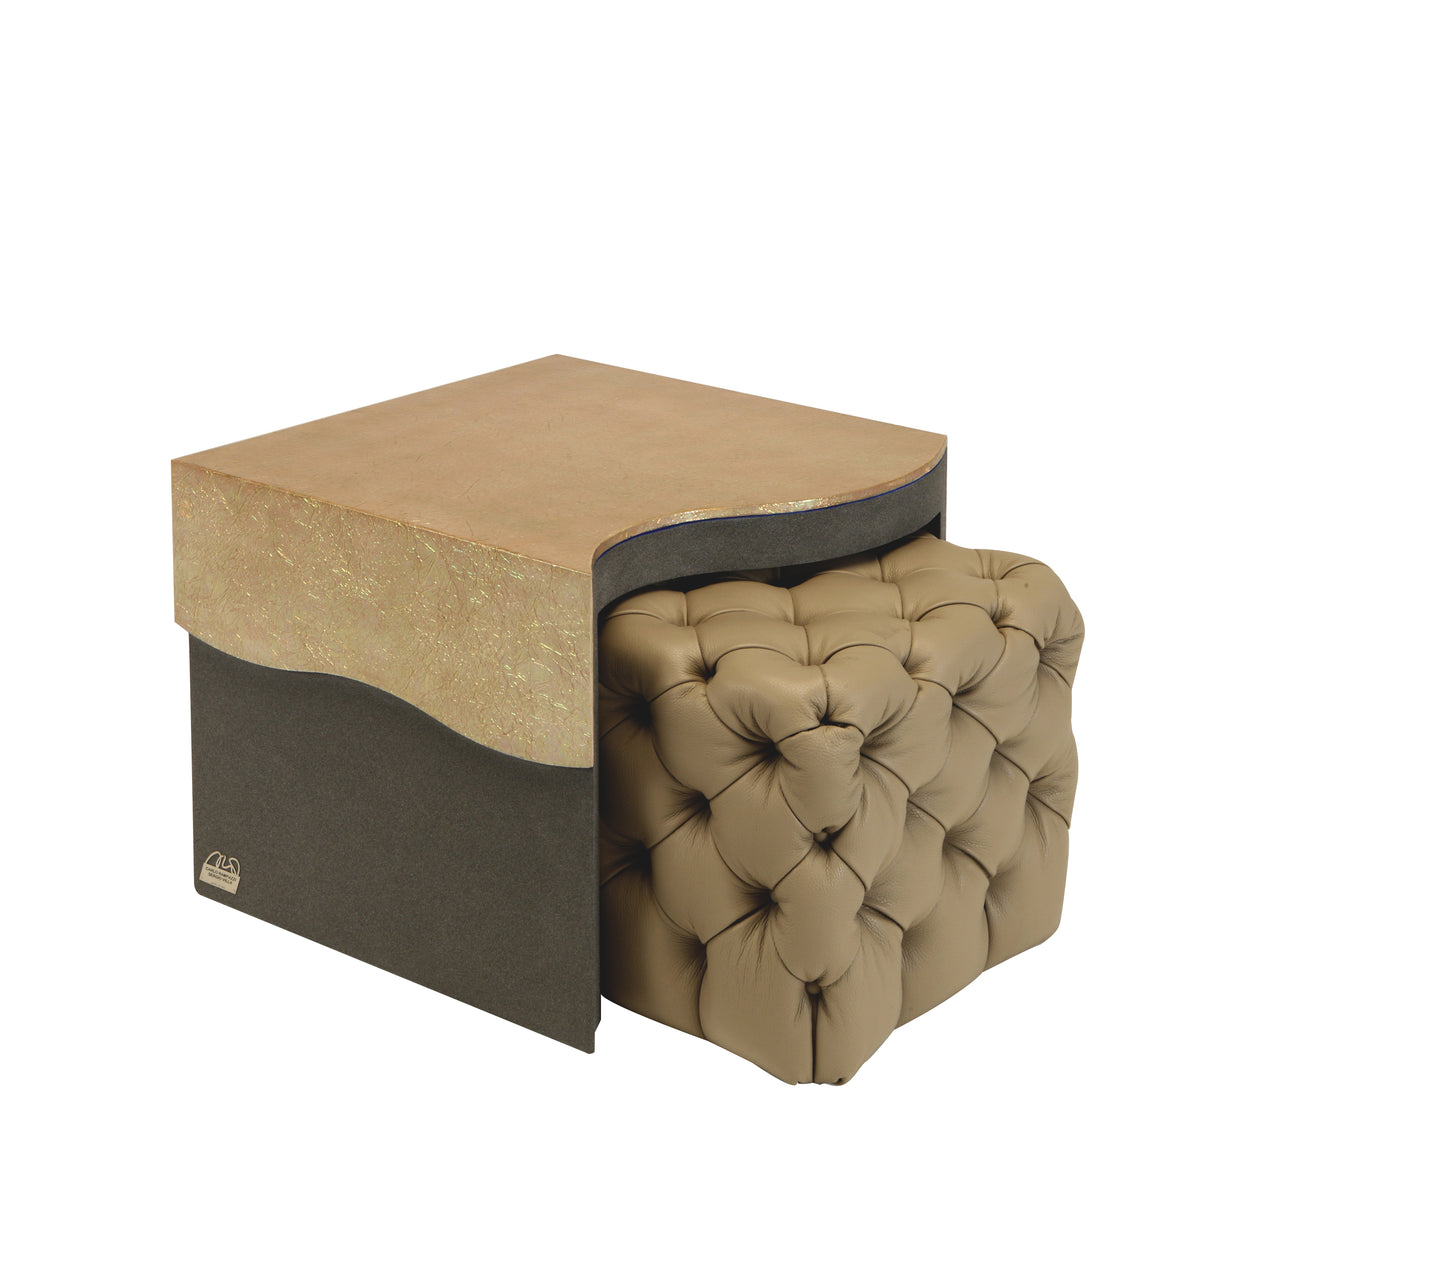 Onda Ceta Side Table with Extractable Bench